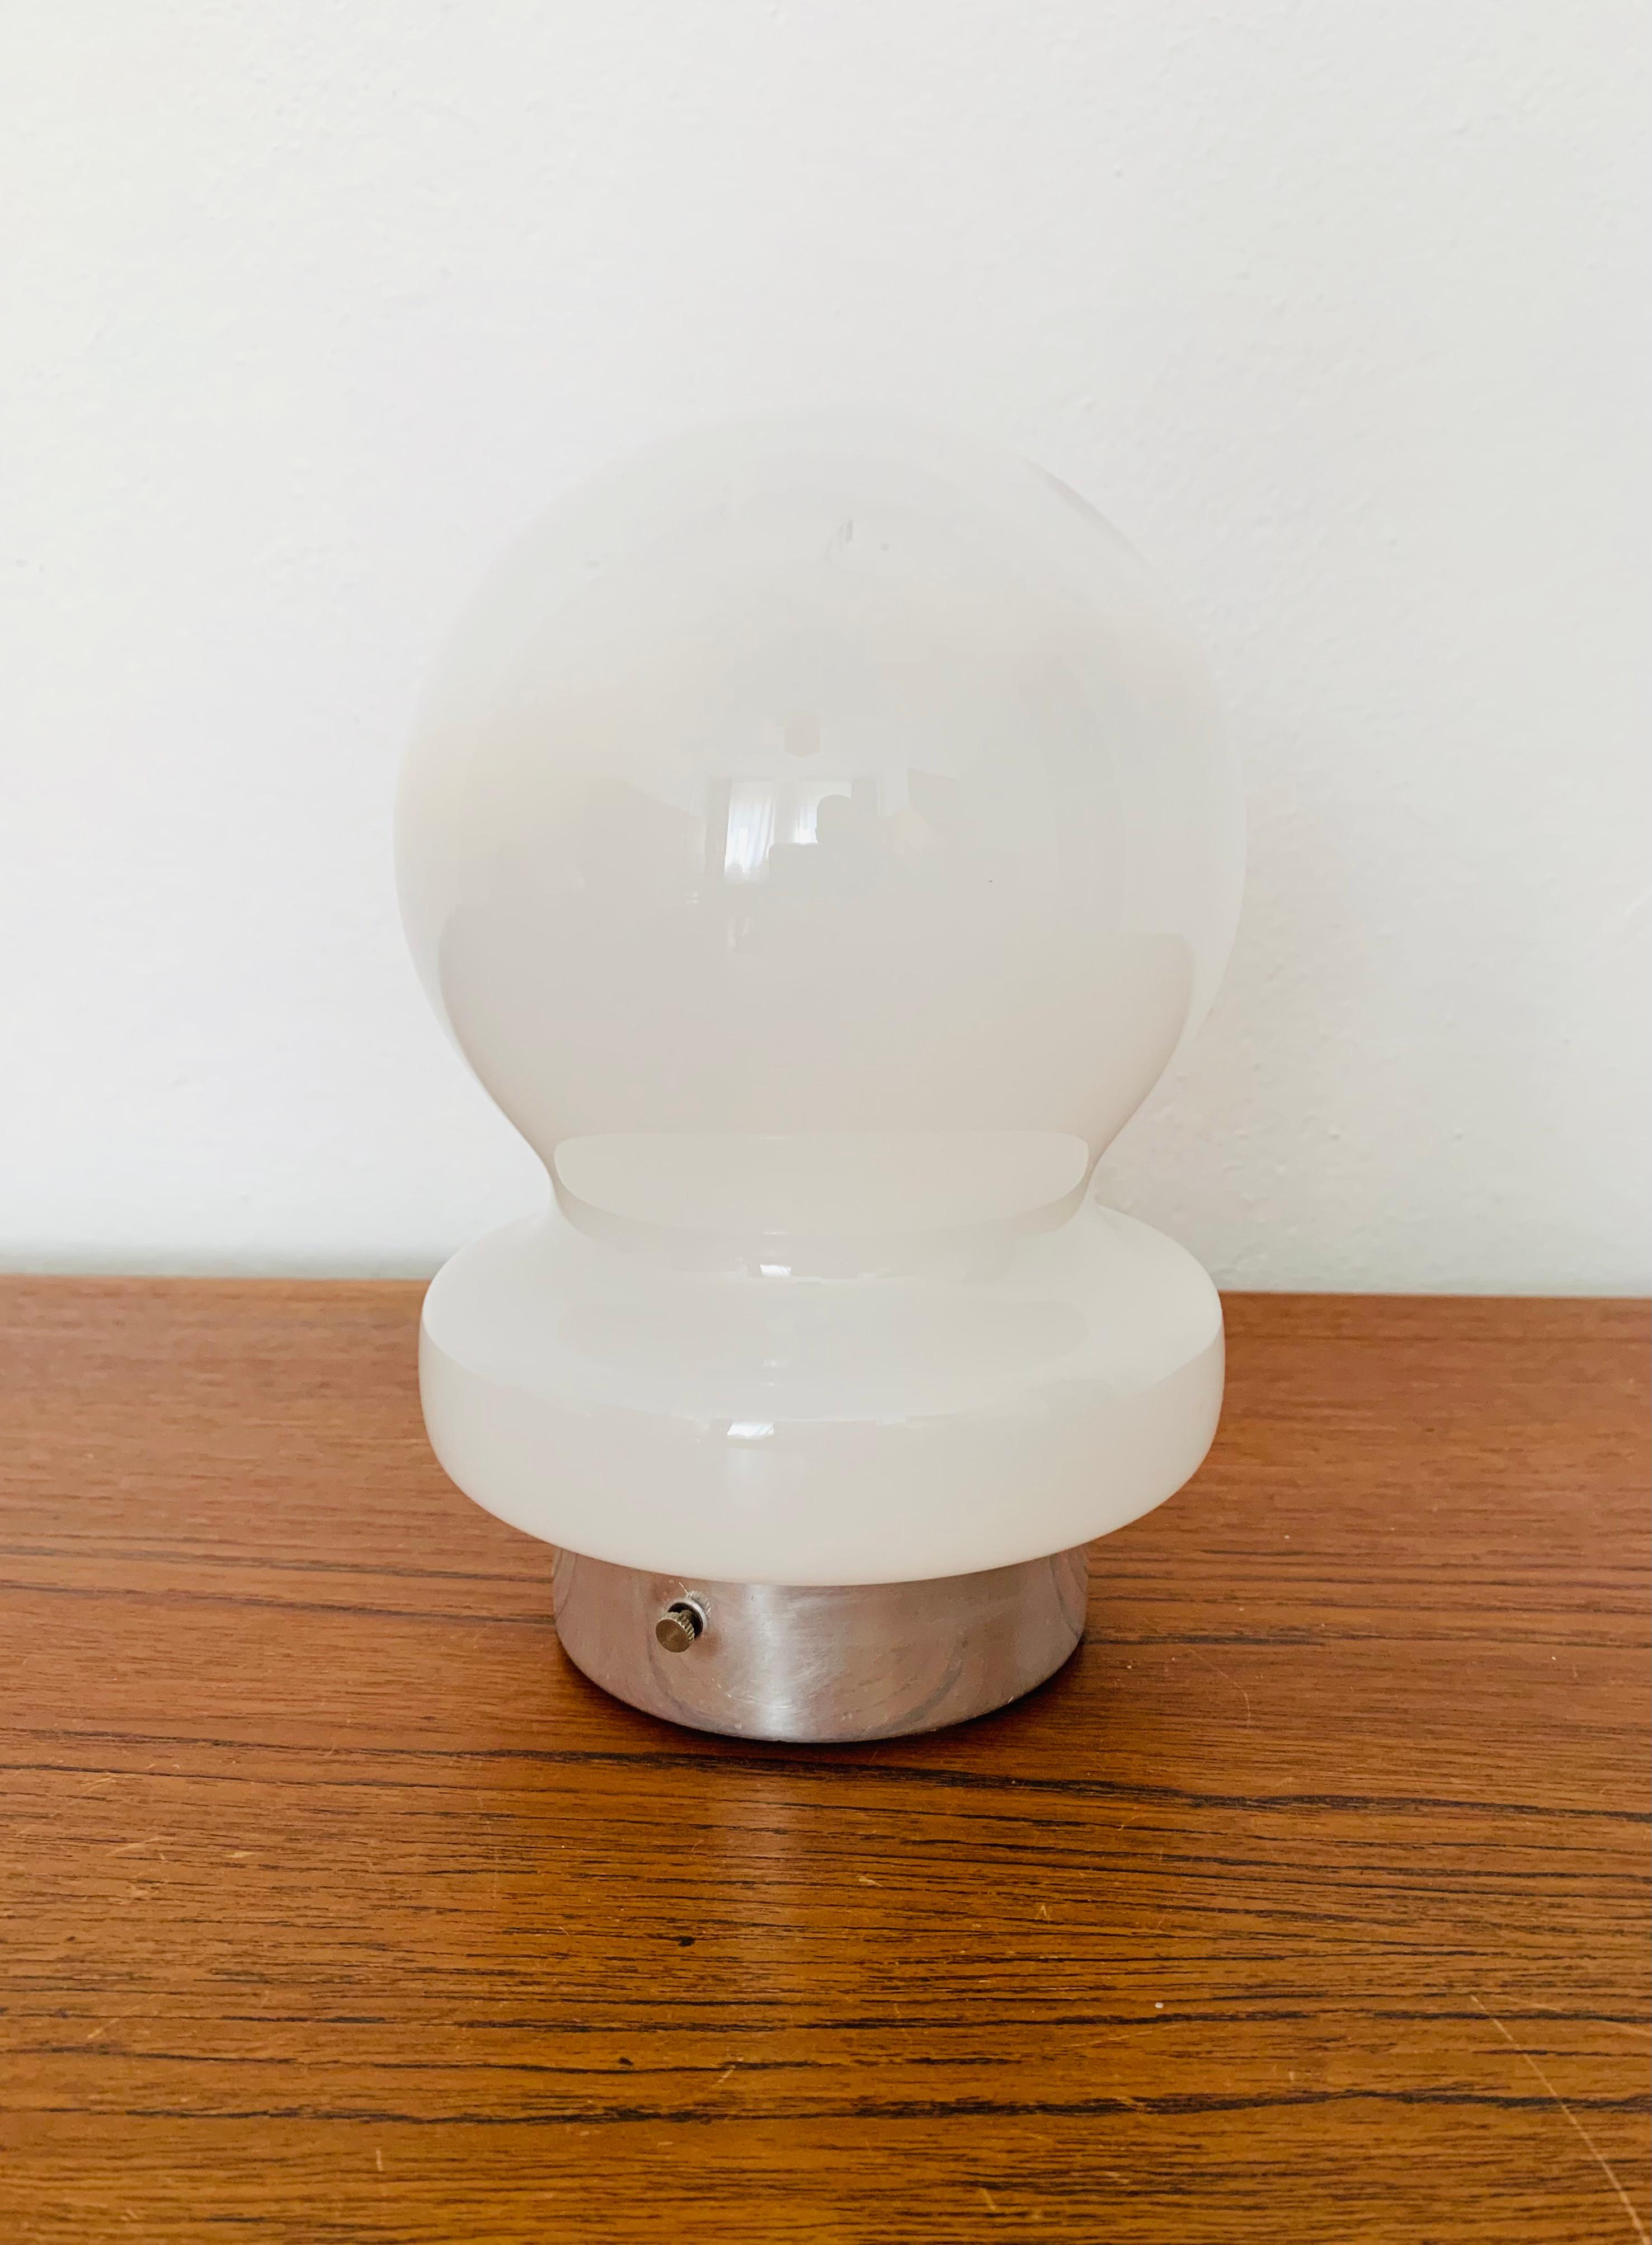 Charming little Murano glass table lamp from the 1960s.
The lamp is very noble and a very special design object.
The color gradient creates a pleasant light.

Condition:

Very good vintage condition with slight signs of wear consistent with